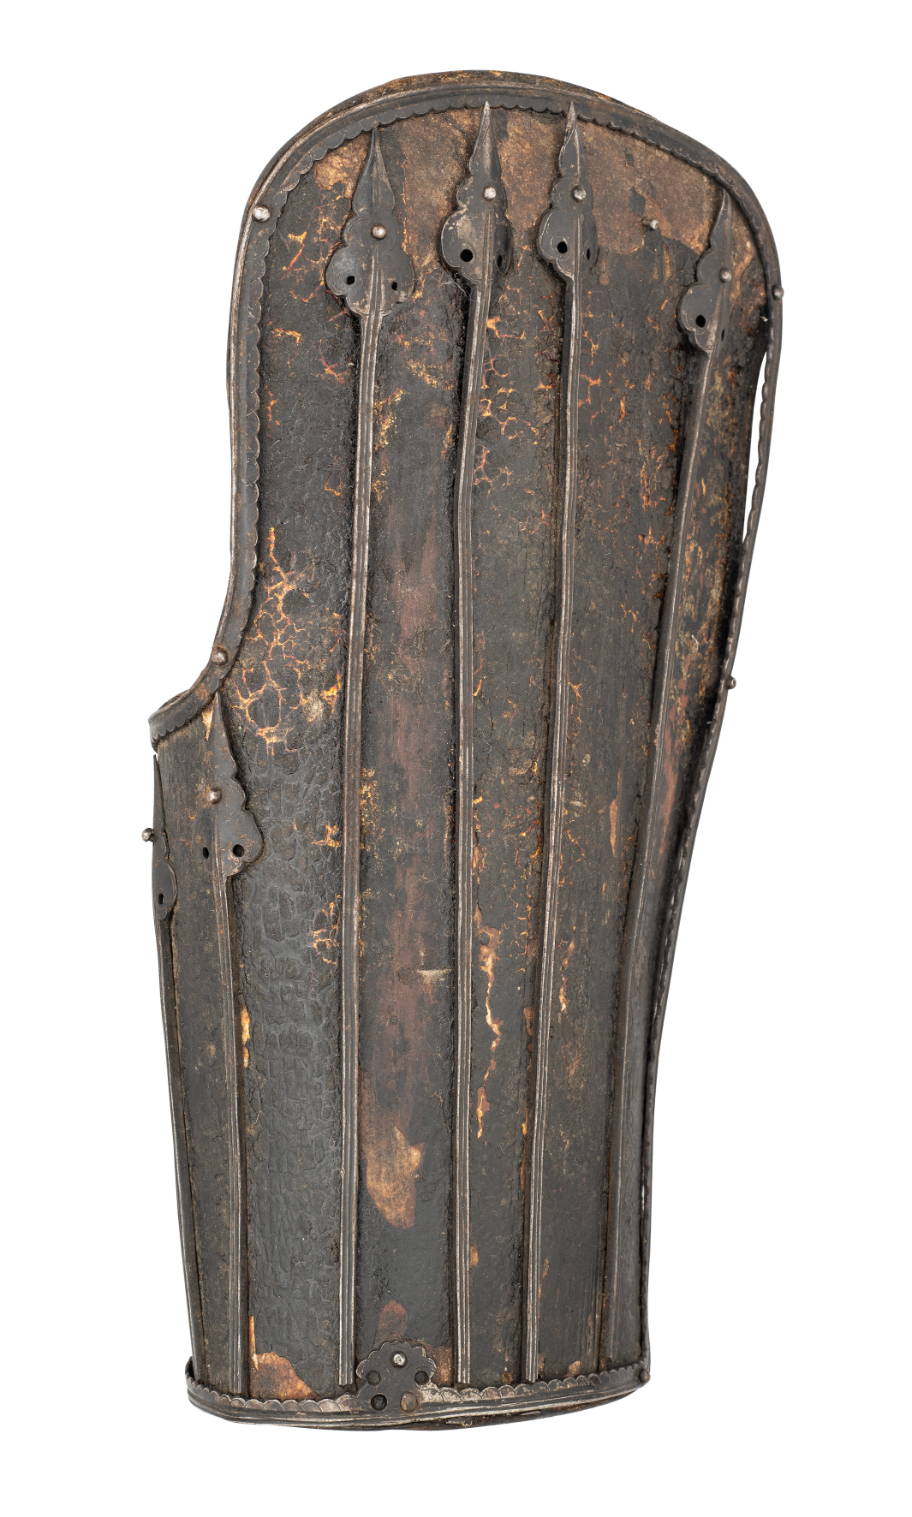 A RARE IRON-MOUNTED LACQUERED LEATHER FOREARM DEFENCE